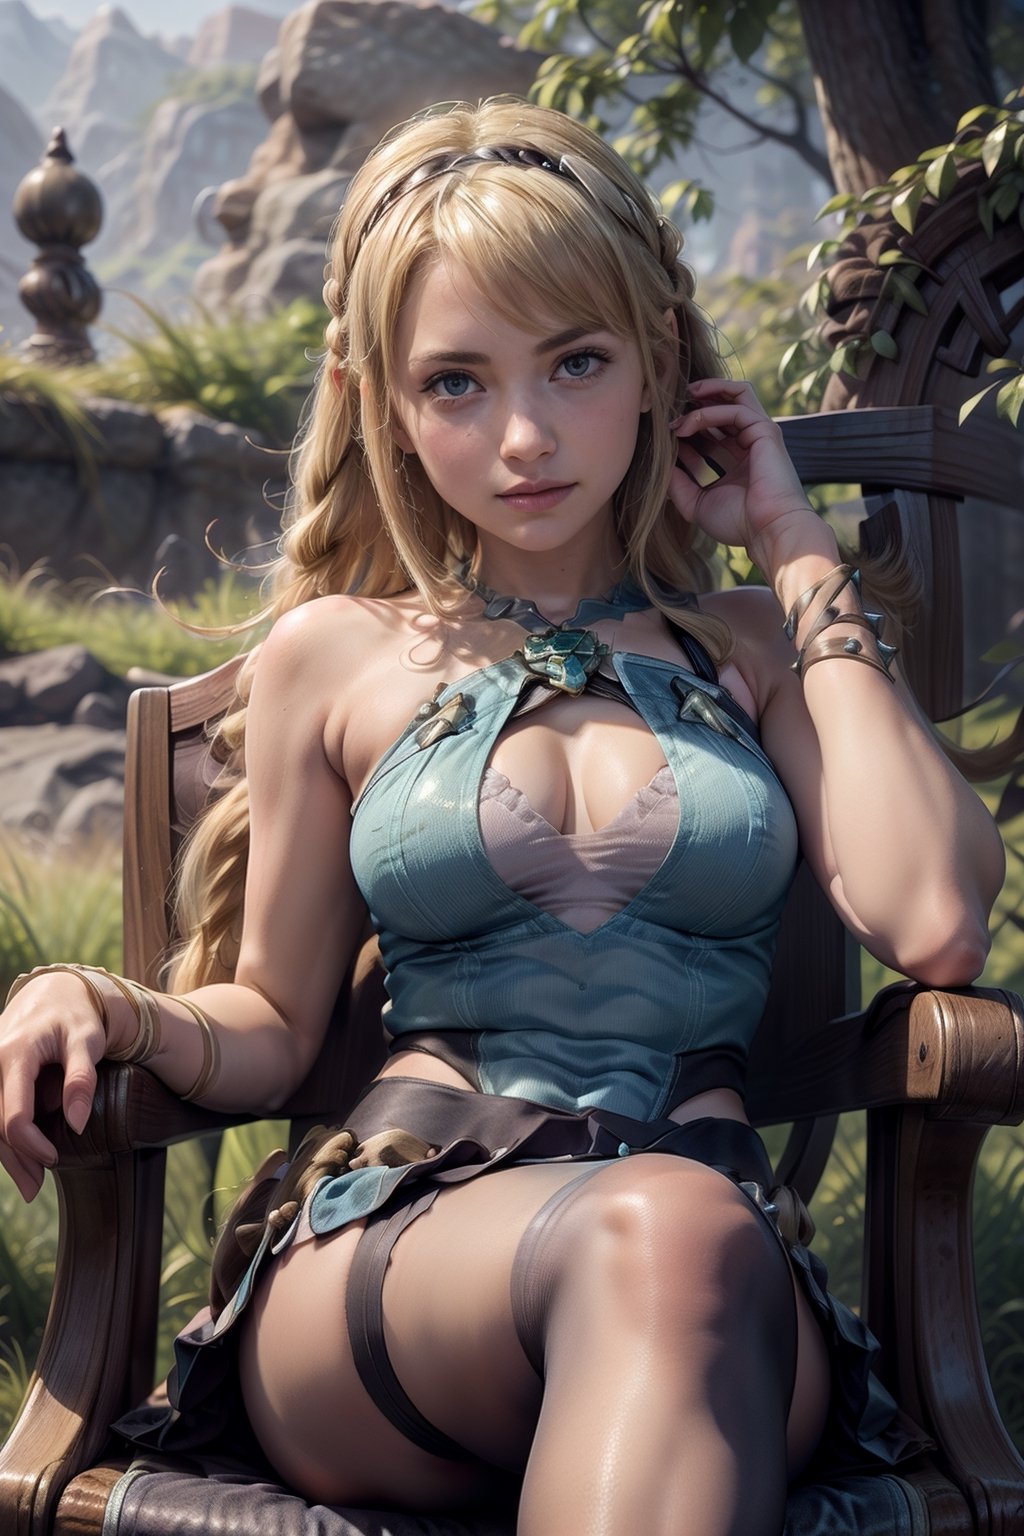   smile,   mature_woman, 27 years old, stern expression, frustrated, disappointed, flirty pose, sexy, looking at viewer, scenic view, Extremely Realistic, high resolution, masterpiece, 

,Astrid Hofferson, long blonde hair with a messy braid and some hair covering her left eye), light blue eyes, has a leather headband with metal spikes around it of her forehead, 

 , , ((tiara, earrings, chest jewel, sleeveless, white skirt, elbow gloves, thigh strap, pantyhose))

   scenic view, smile,  parted lips ,

 crossed legs, sitting in a chair, elbows on chair, 